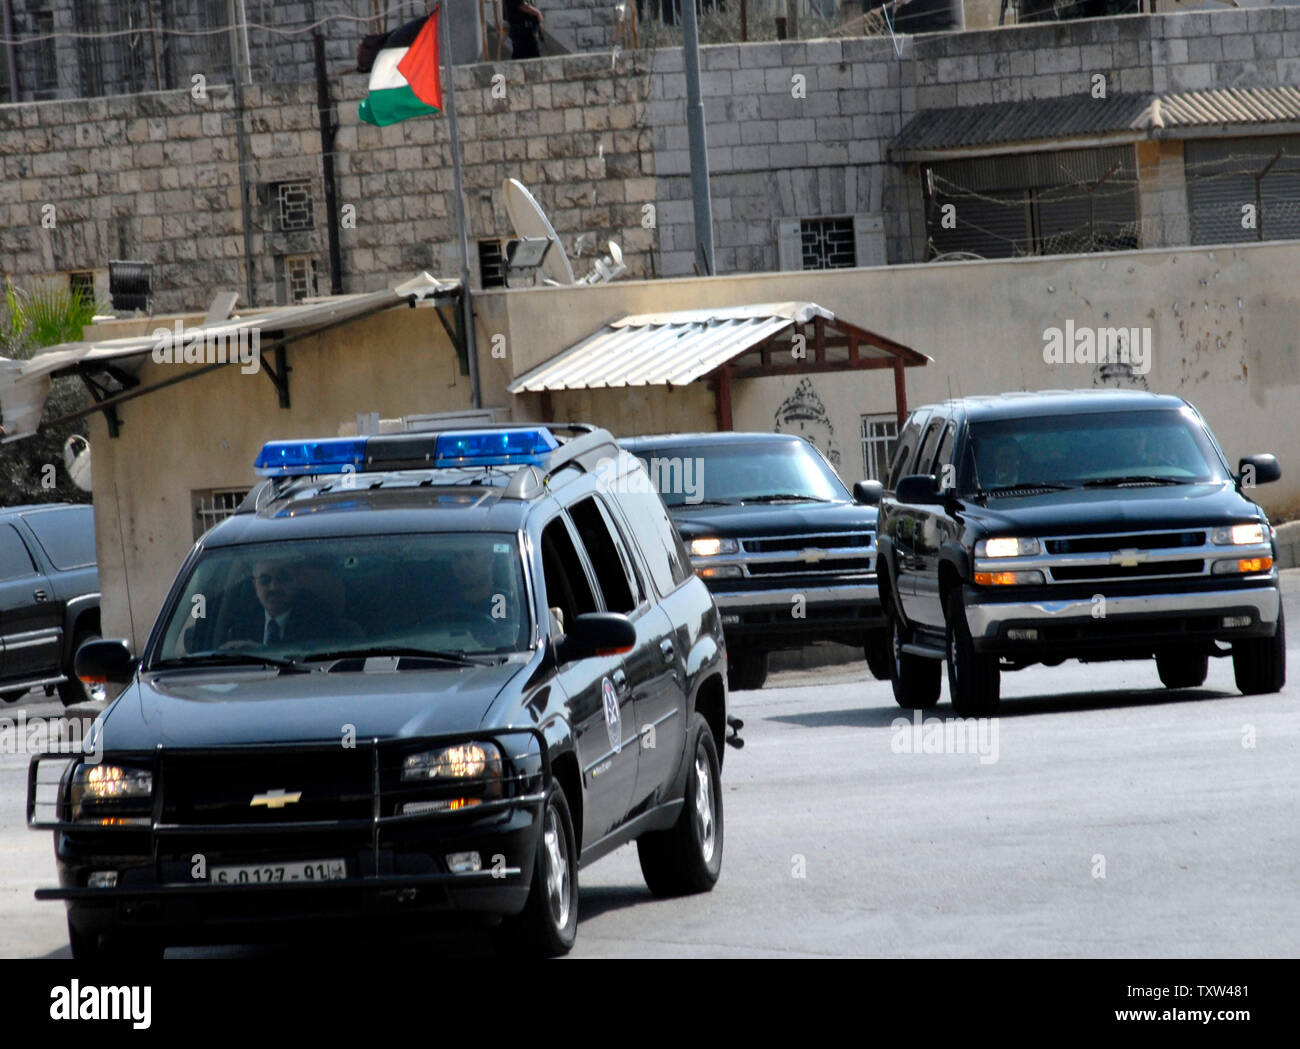 https://c8.alamy.com/comp/TXW481/us-secretary-of-state-condoleezza-rices-convoy-arrives-for-a-meeting-with-palestinian-president-mahmoud-abbas-in-the-palestinian-presidential-compound-in-ramallah-west-bank-october-15-2007-rice-is-in-the-region-to-try-and-bridge-the-differences-between-the-israelis-and-palestinians-before-the-annapolis-summit-in-late-november-upi-photodebbie-hill-TXW481.jpg